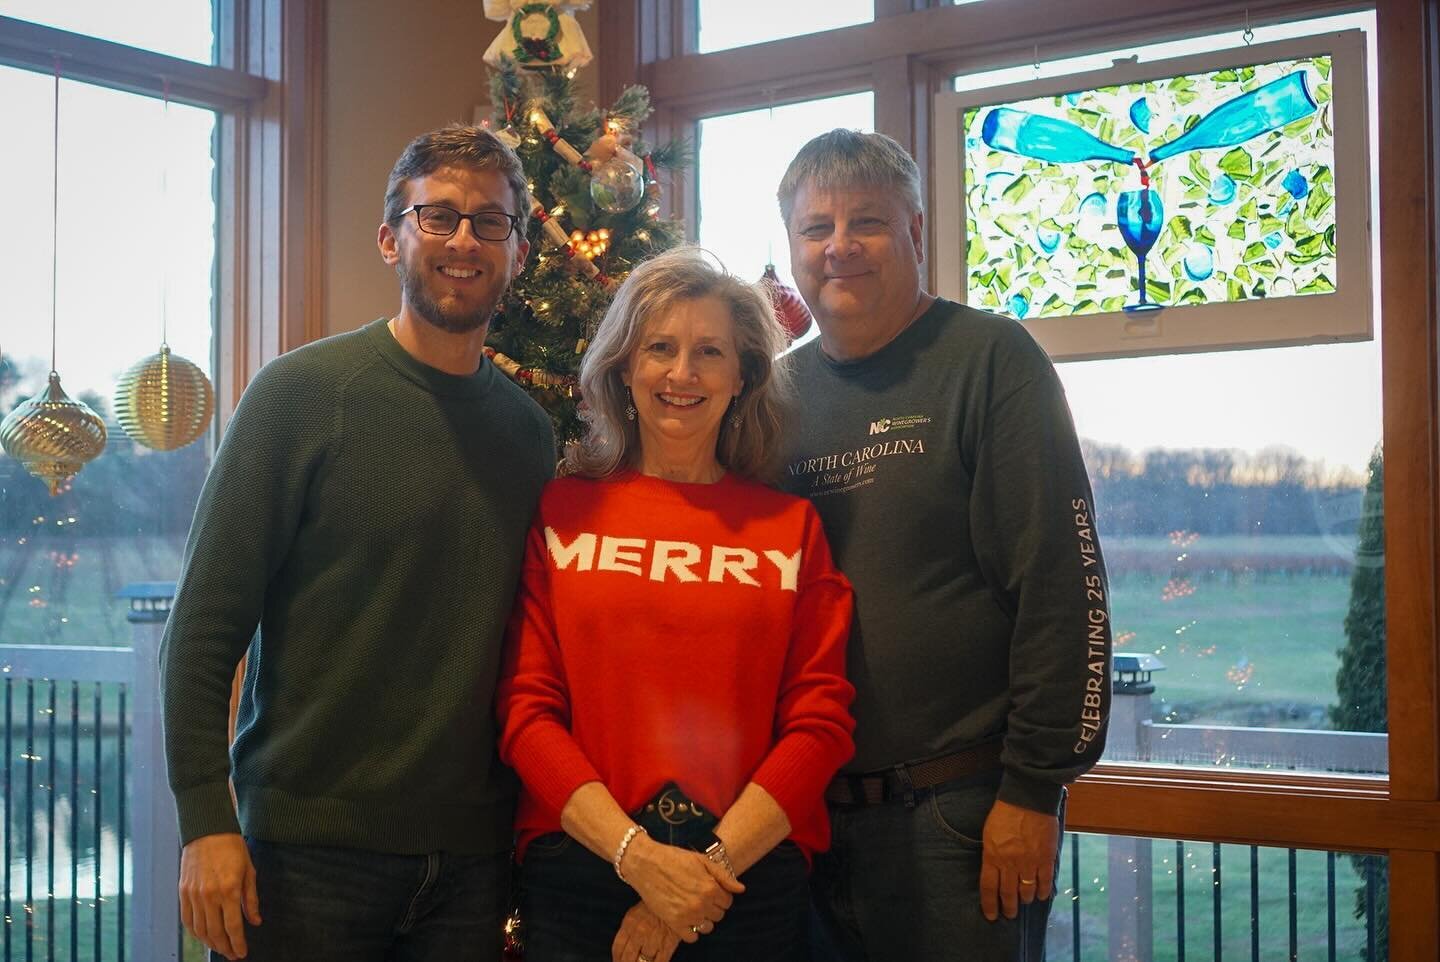 Happy holidays to all our customers and friends! Wishing you a bright 2024 filled with joy and 🍷.

Chuck, Jamey, and Justin

#ncwine 
#visitnc 
#yadkinvalley